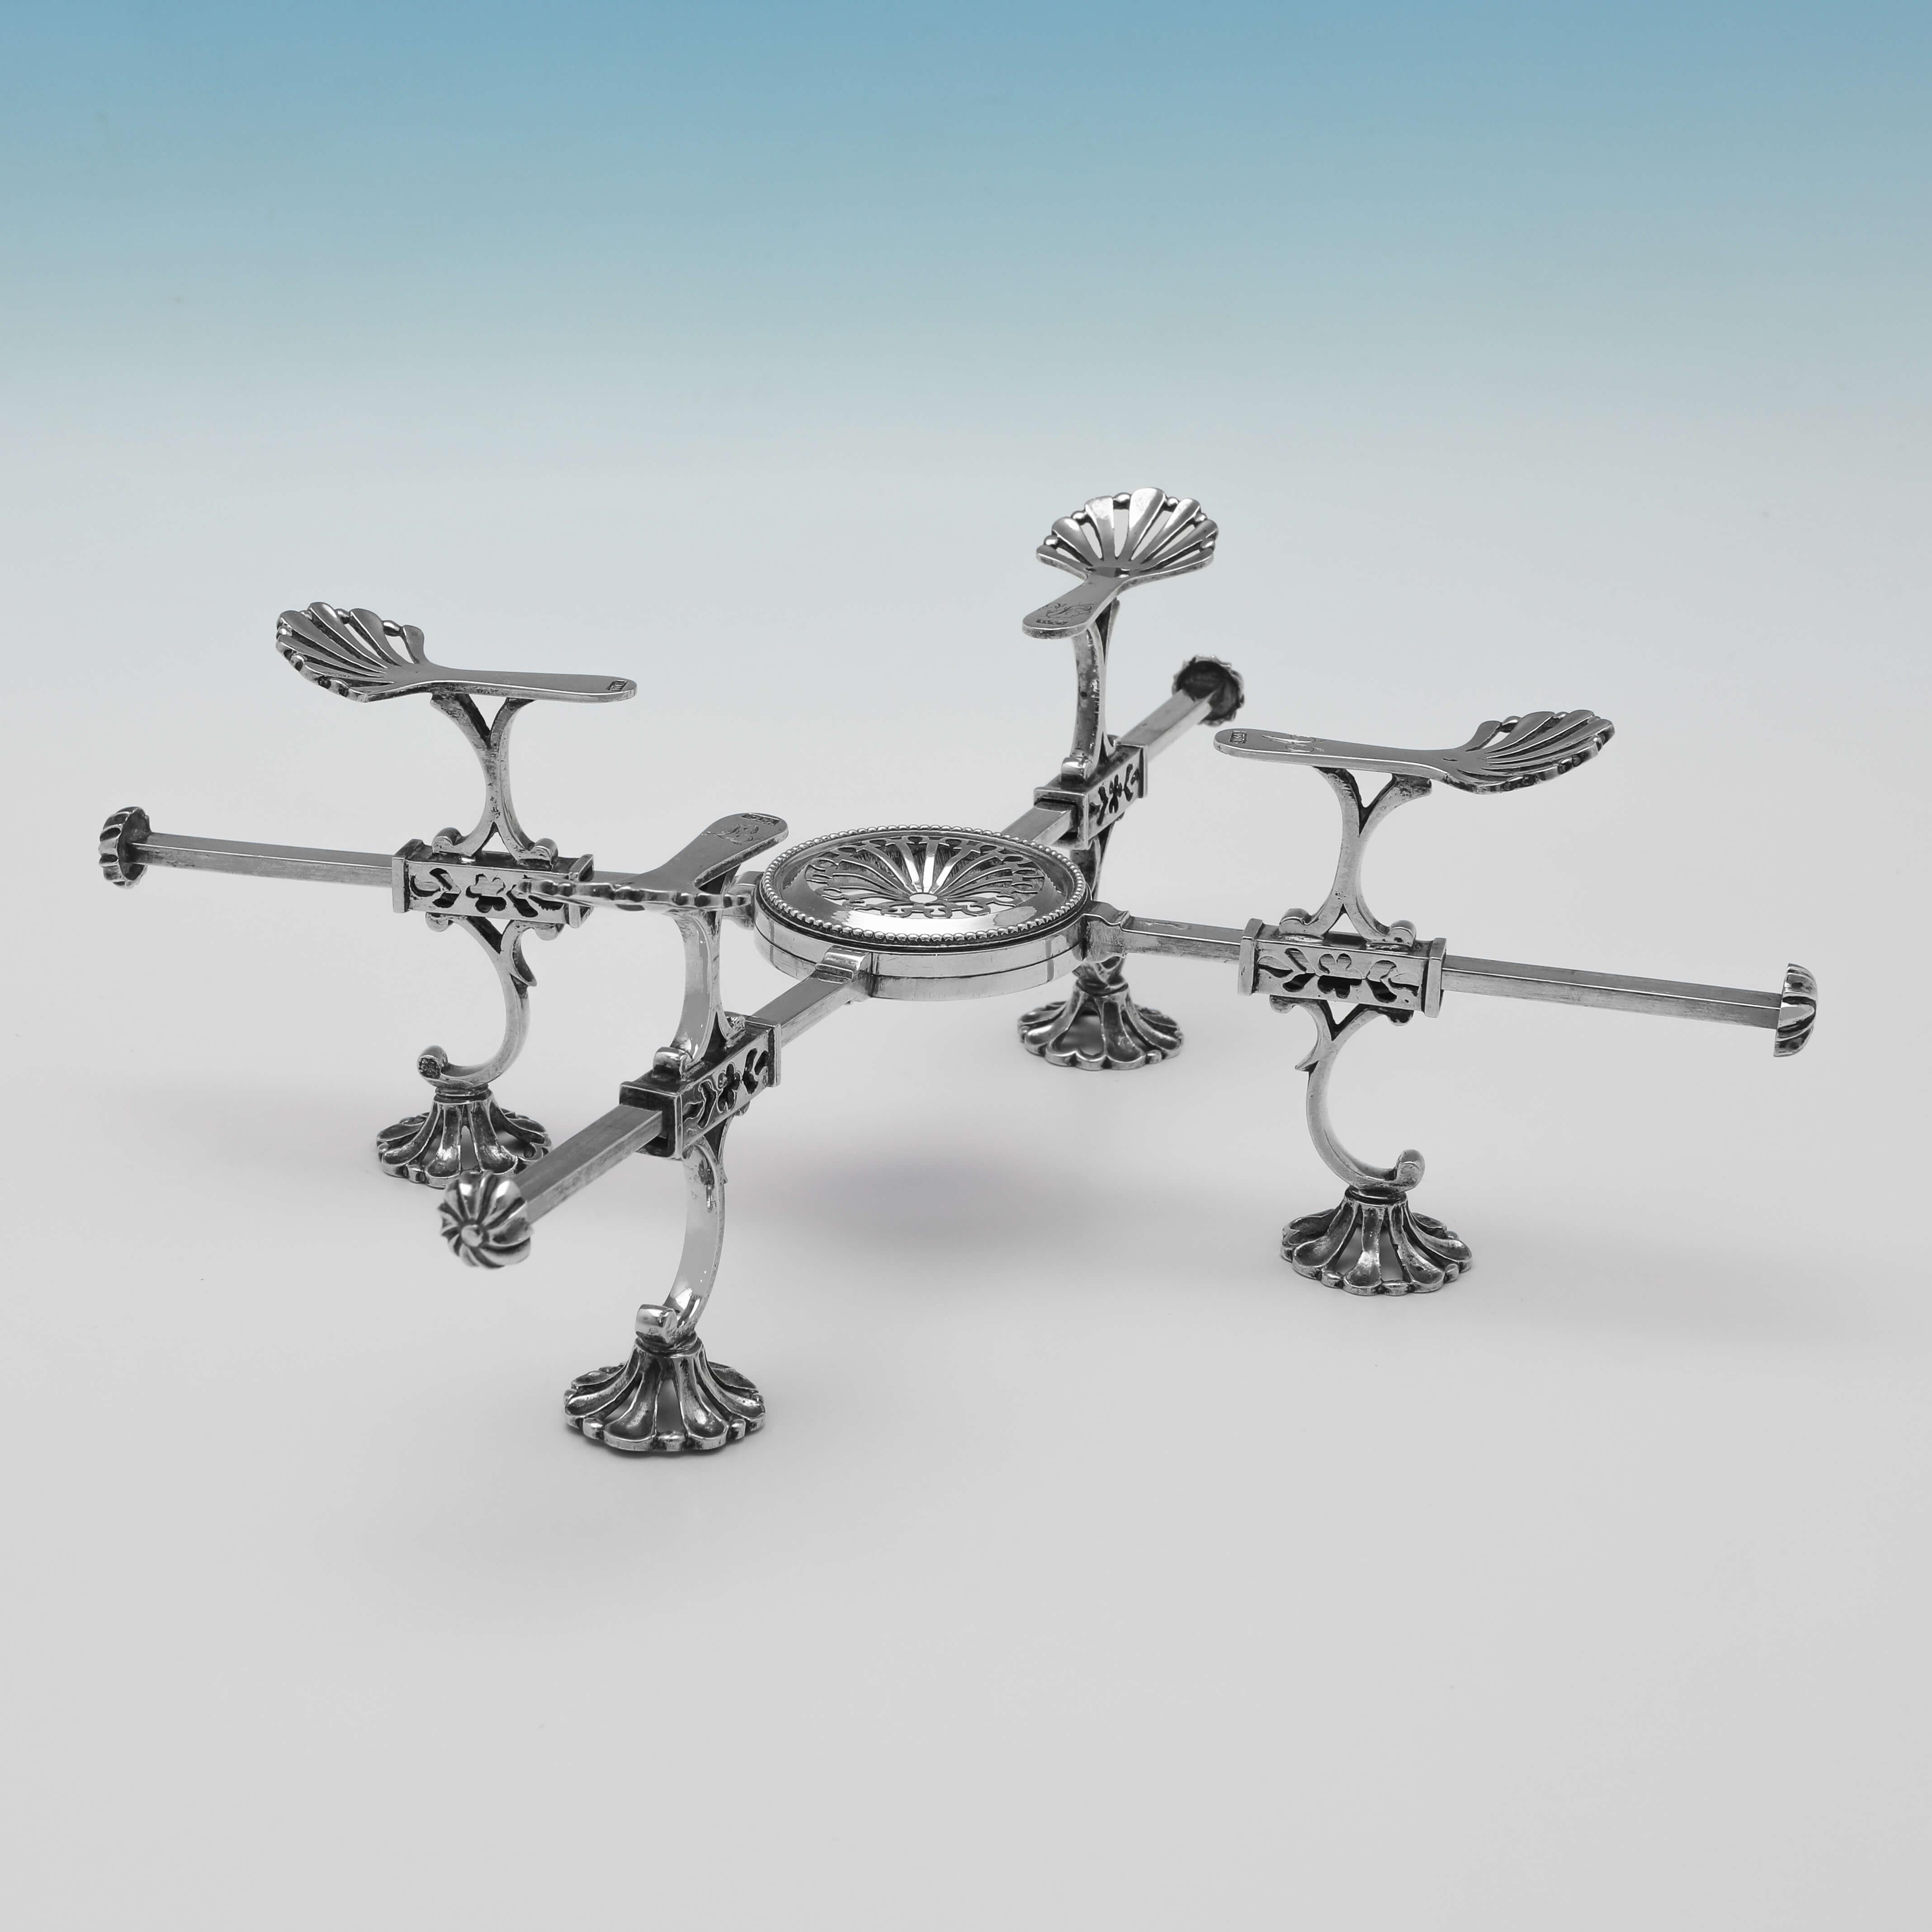 Hallmarked in London in 1777 by William Cripps, this very handsome. Antique Sterling Silver Dish Cross, is of traditional form and is engraved with original initials to 3 of the arms. 

The dish cross measures 3.5